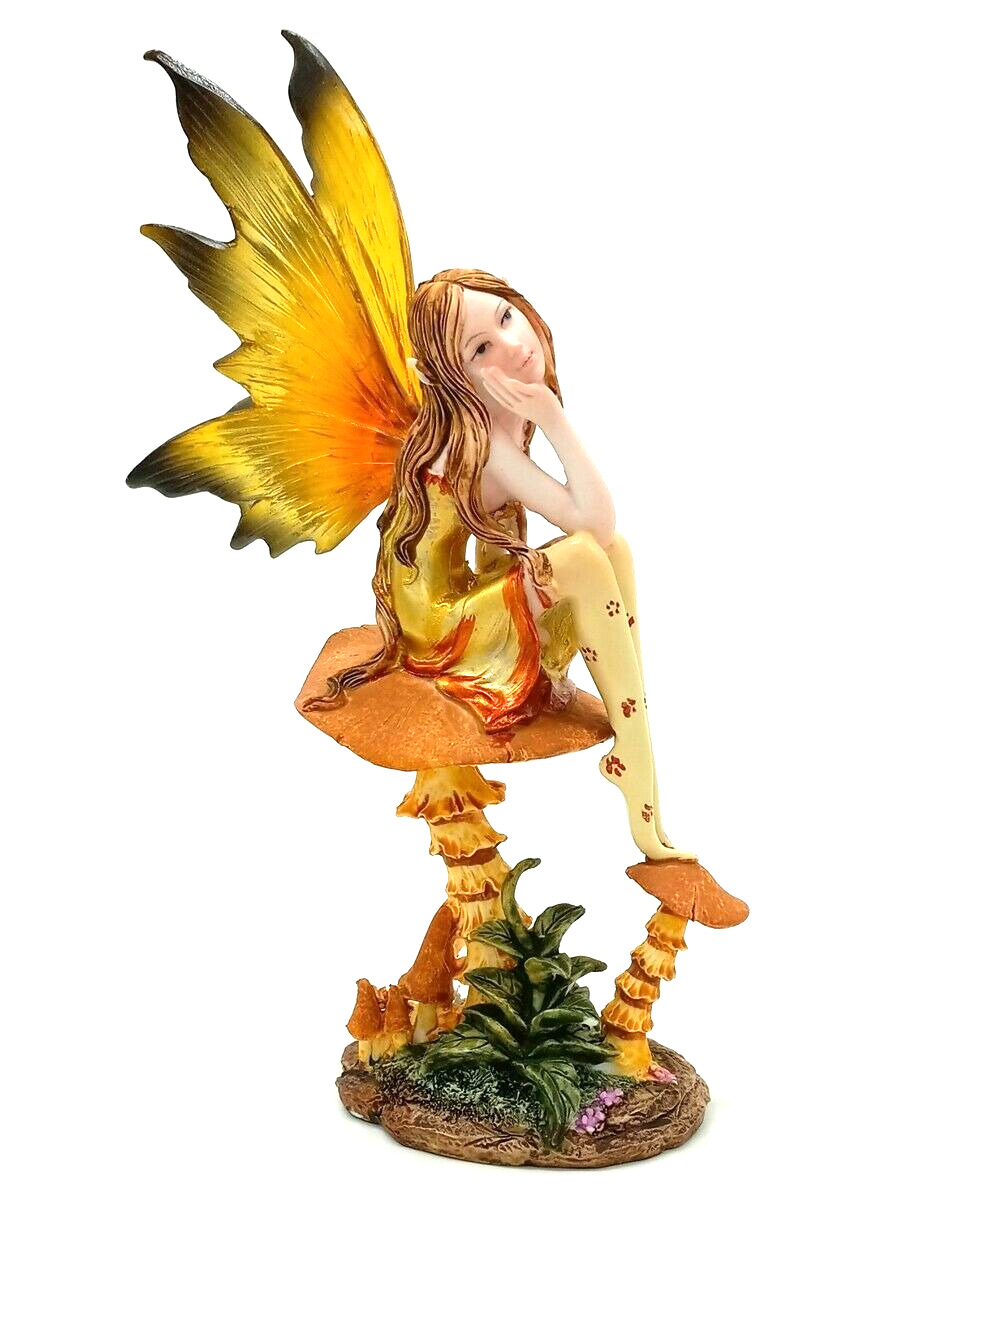 Yellow and Orange Winged Pixie Fairy Figure Sitting on a Mushroom H= 8.75 inches